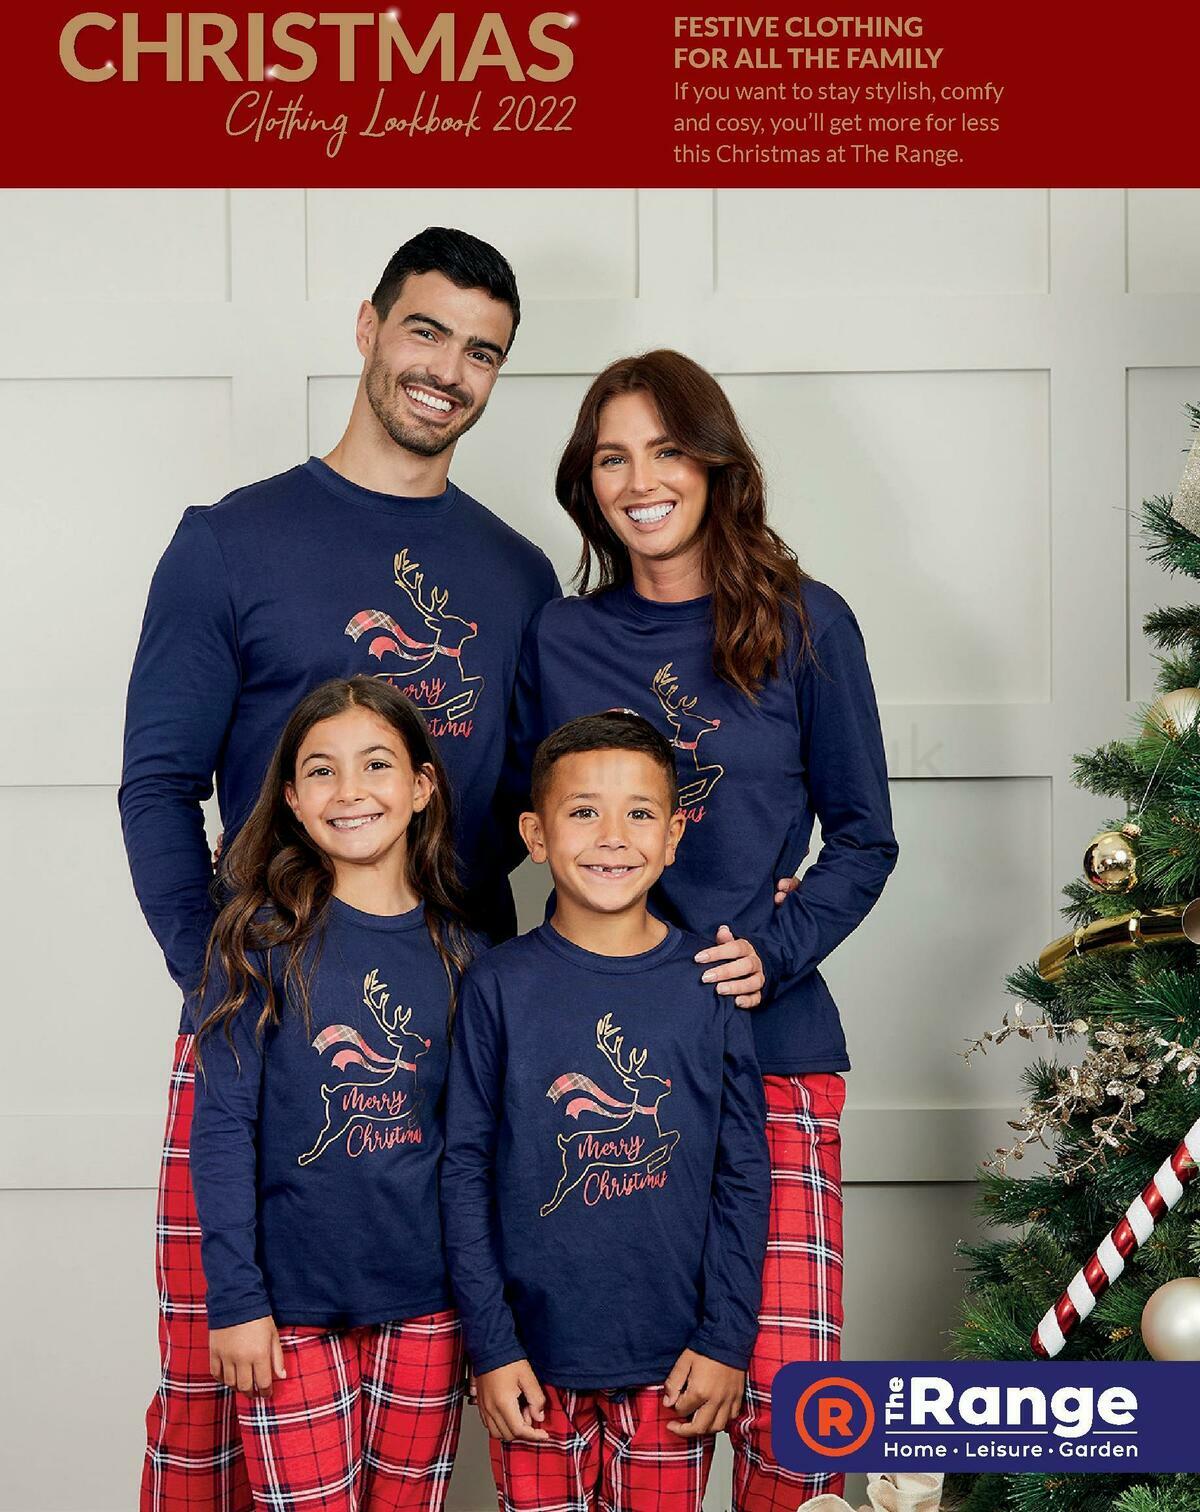 The Range Christmas Clothing Offers from 1 October